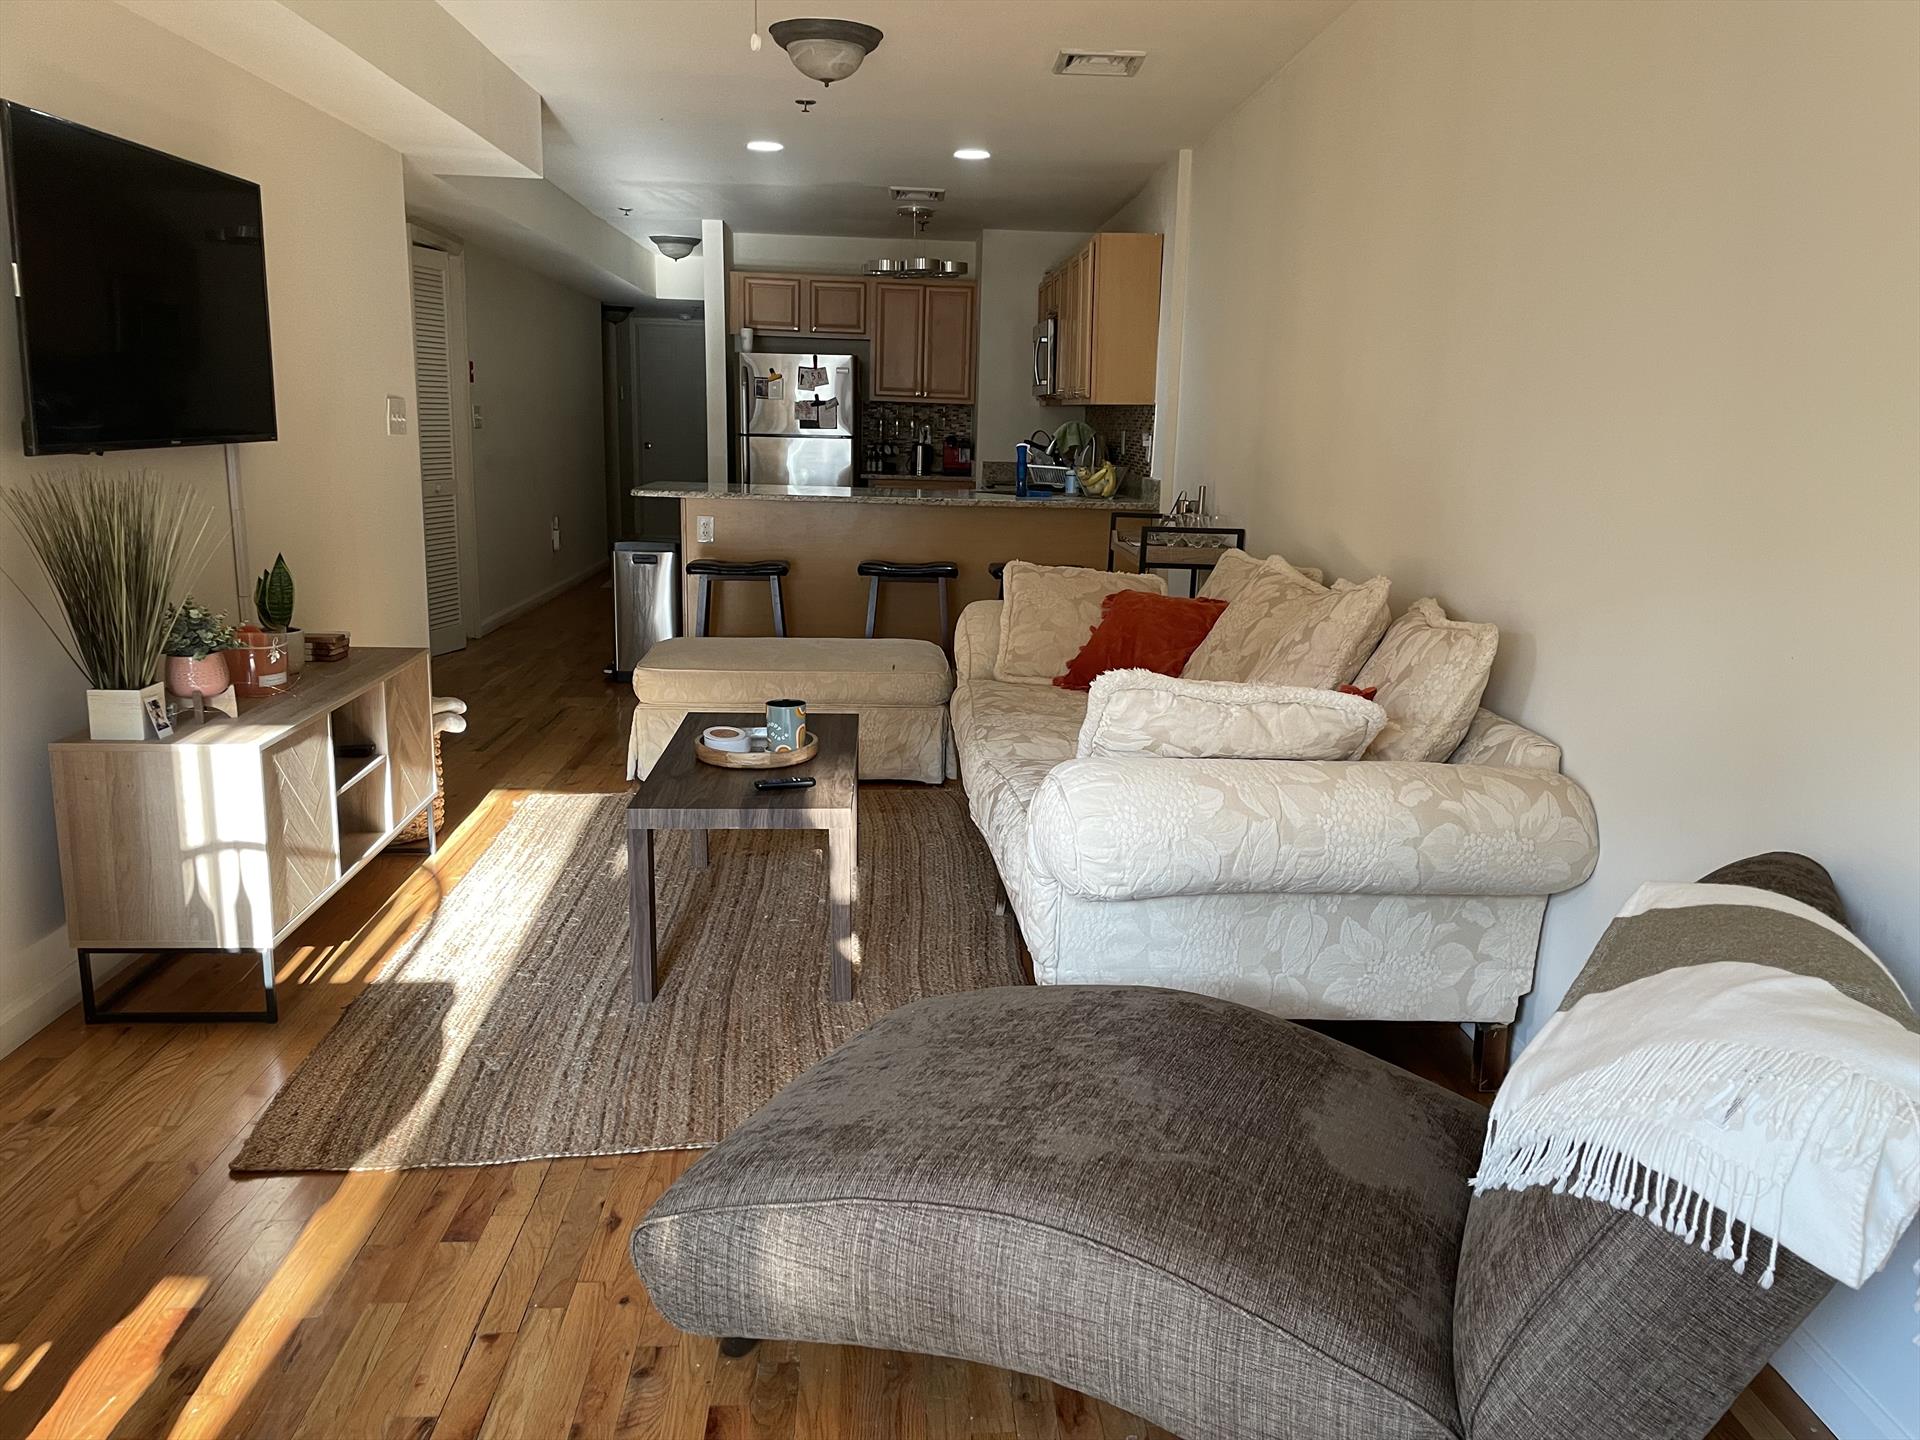 DOWNTOWN HOBOKEN-5th & Bloomfield! Renovated 3 BR/2 Bath apt in Brownstone Bldg along a tree-lined quiet street. Walk to PATH, private patio w/table. Common yard. New modern open kitchen w/granite Breakfast bar & glass back splash.SS sink/Faucet, Stainless Steel appliances: Micro/ref/gas stove & D/W. Large windows in all rooms. Coin op common W/D room on 1st floor. Central Air, HDWD floors, ceiling fan, living room has space for dining table. Closet & windows in all BR's. Street level (not basement), private patio area off back with table, umbrella, and chairs. The landscaped common yard is great for BBQ. There is a bike rack in front. The apartment will be professionally cleaned & touched up for the new tenant. Close to Bus/PATH. NO DOGS any size. NO SMOKERS-Cat ok w/pet rent +$25 per mo. GOOD CREDIT/REFS. EZ walk to PATH & Bus and Washington St stores & Pubs!